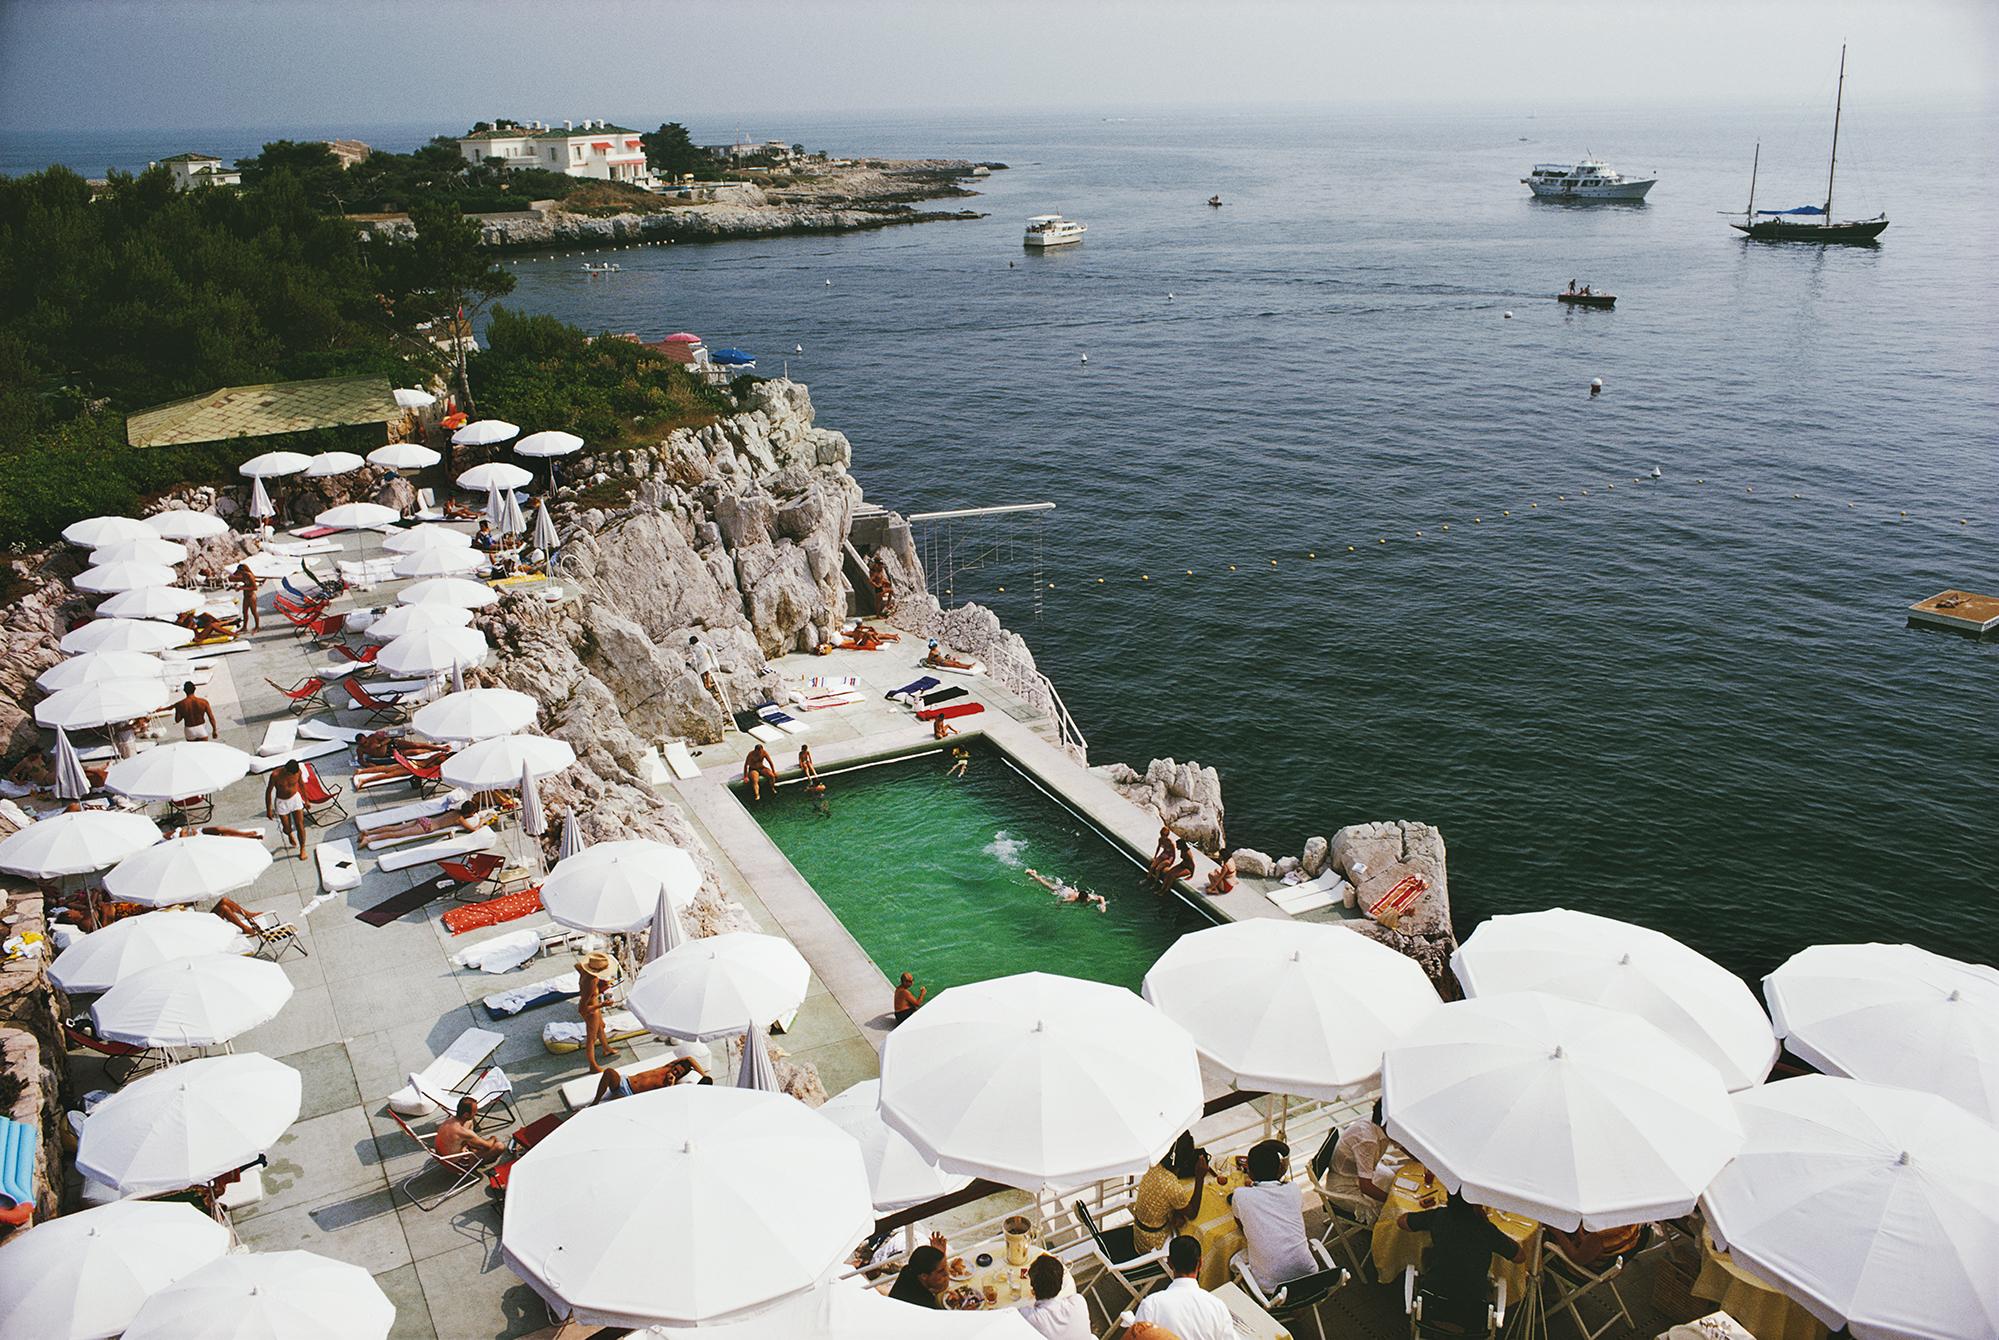 Slim Aarons Color Photograph - Pool by the Sea, Estate Edition